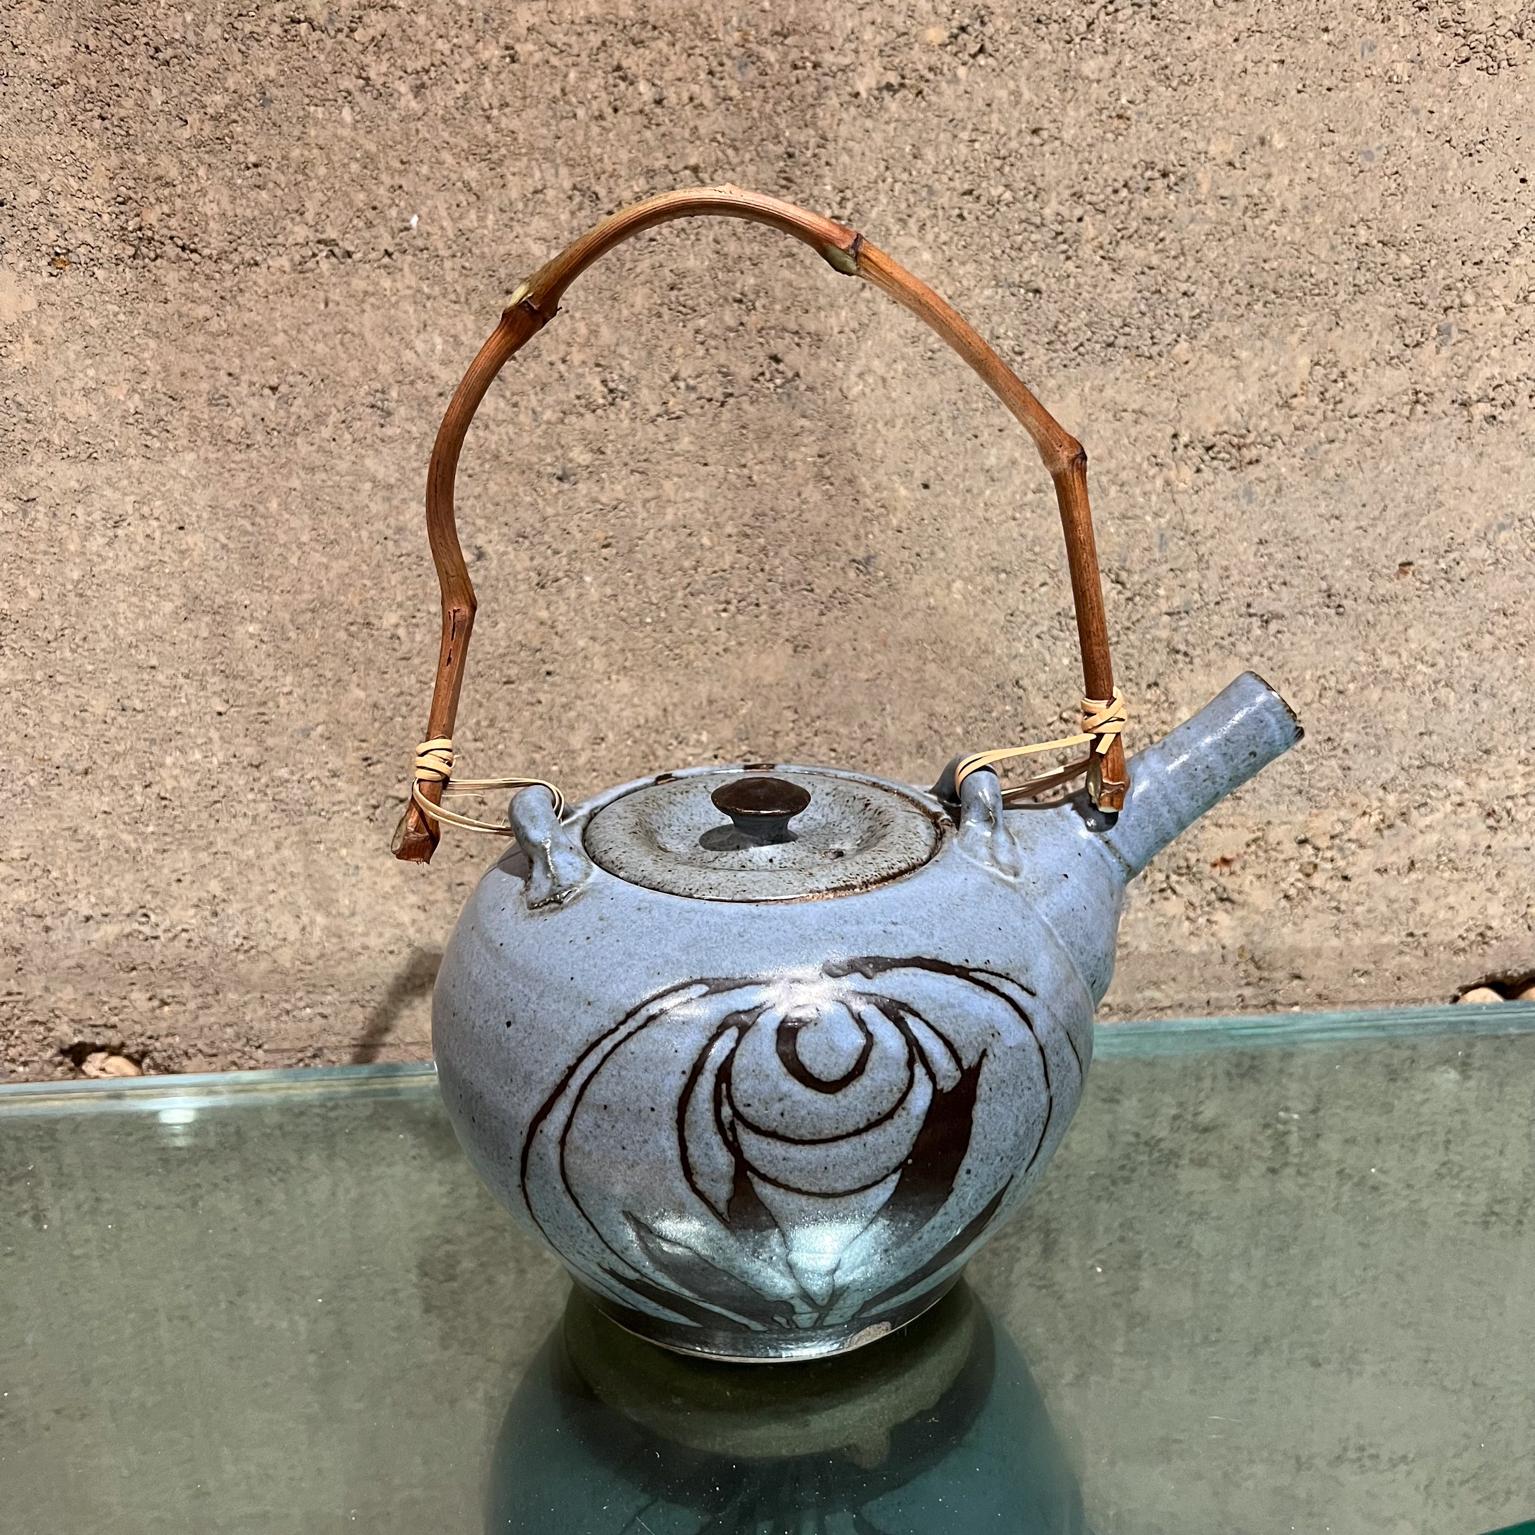 1970s Handcrafted Small Blue Tea Pot Studio Pottery Art 
Signed at bottom
11 h to tip of handle 6 h pottery x 6 w x 8.5 d
Preowned original unrestored vintage condition.
Refer to images provided.
